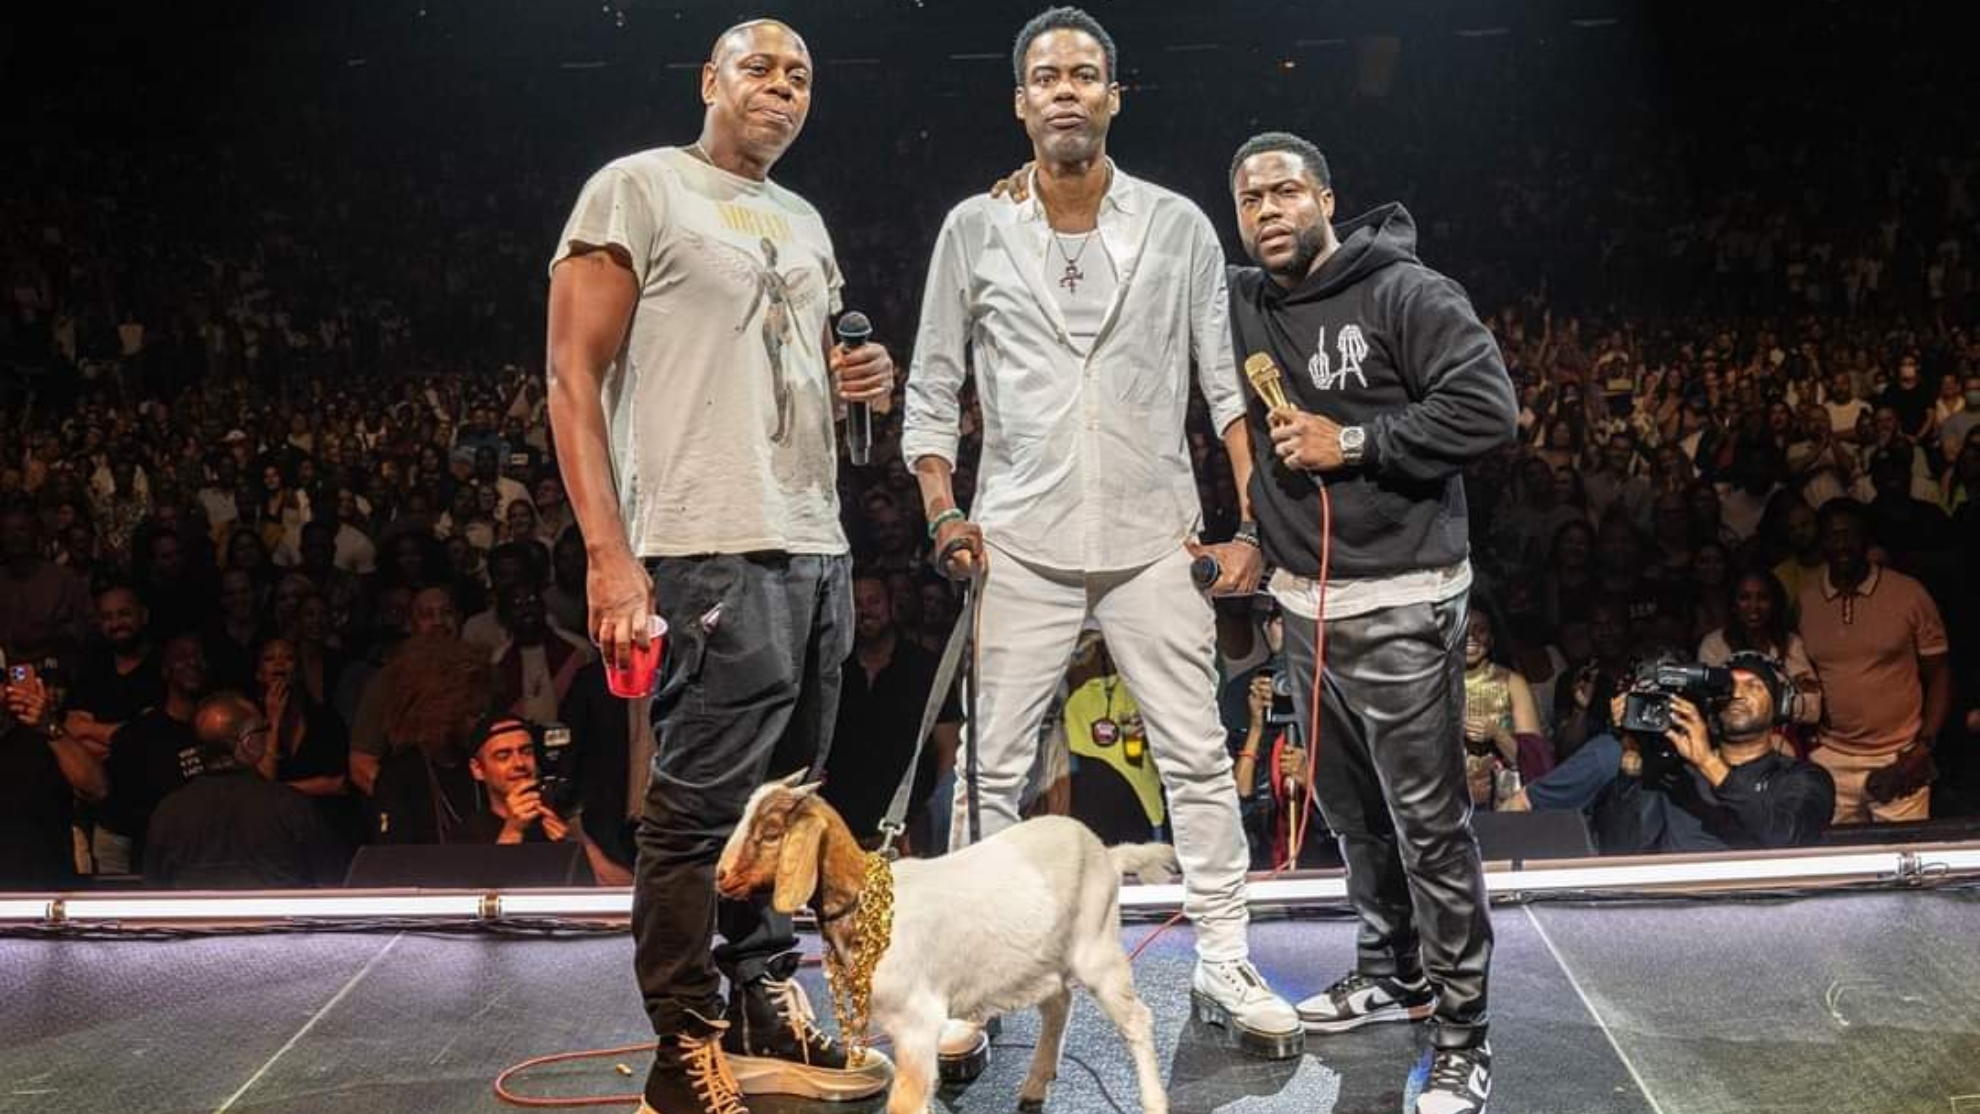 Kevin Hart, Dave Chappelle, Chris Rock and Will Smith (the goat)